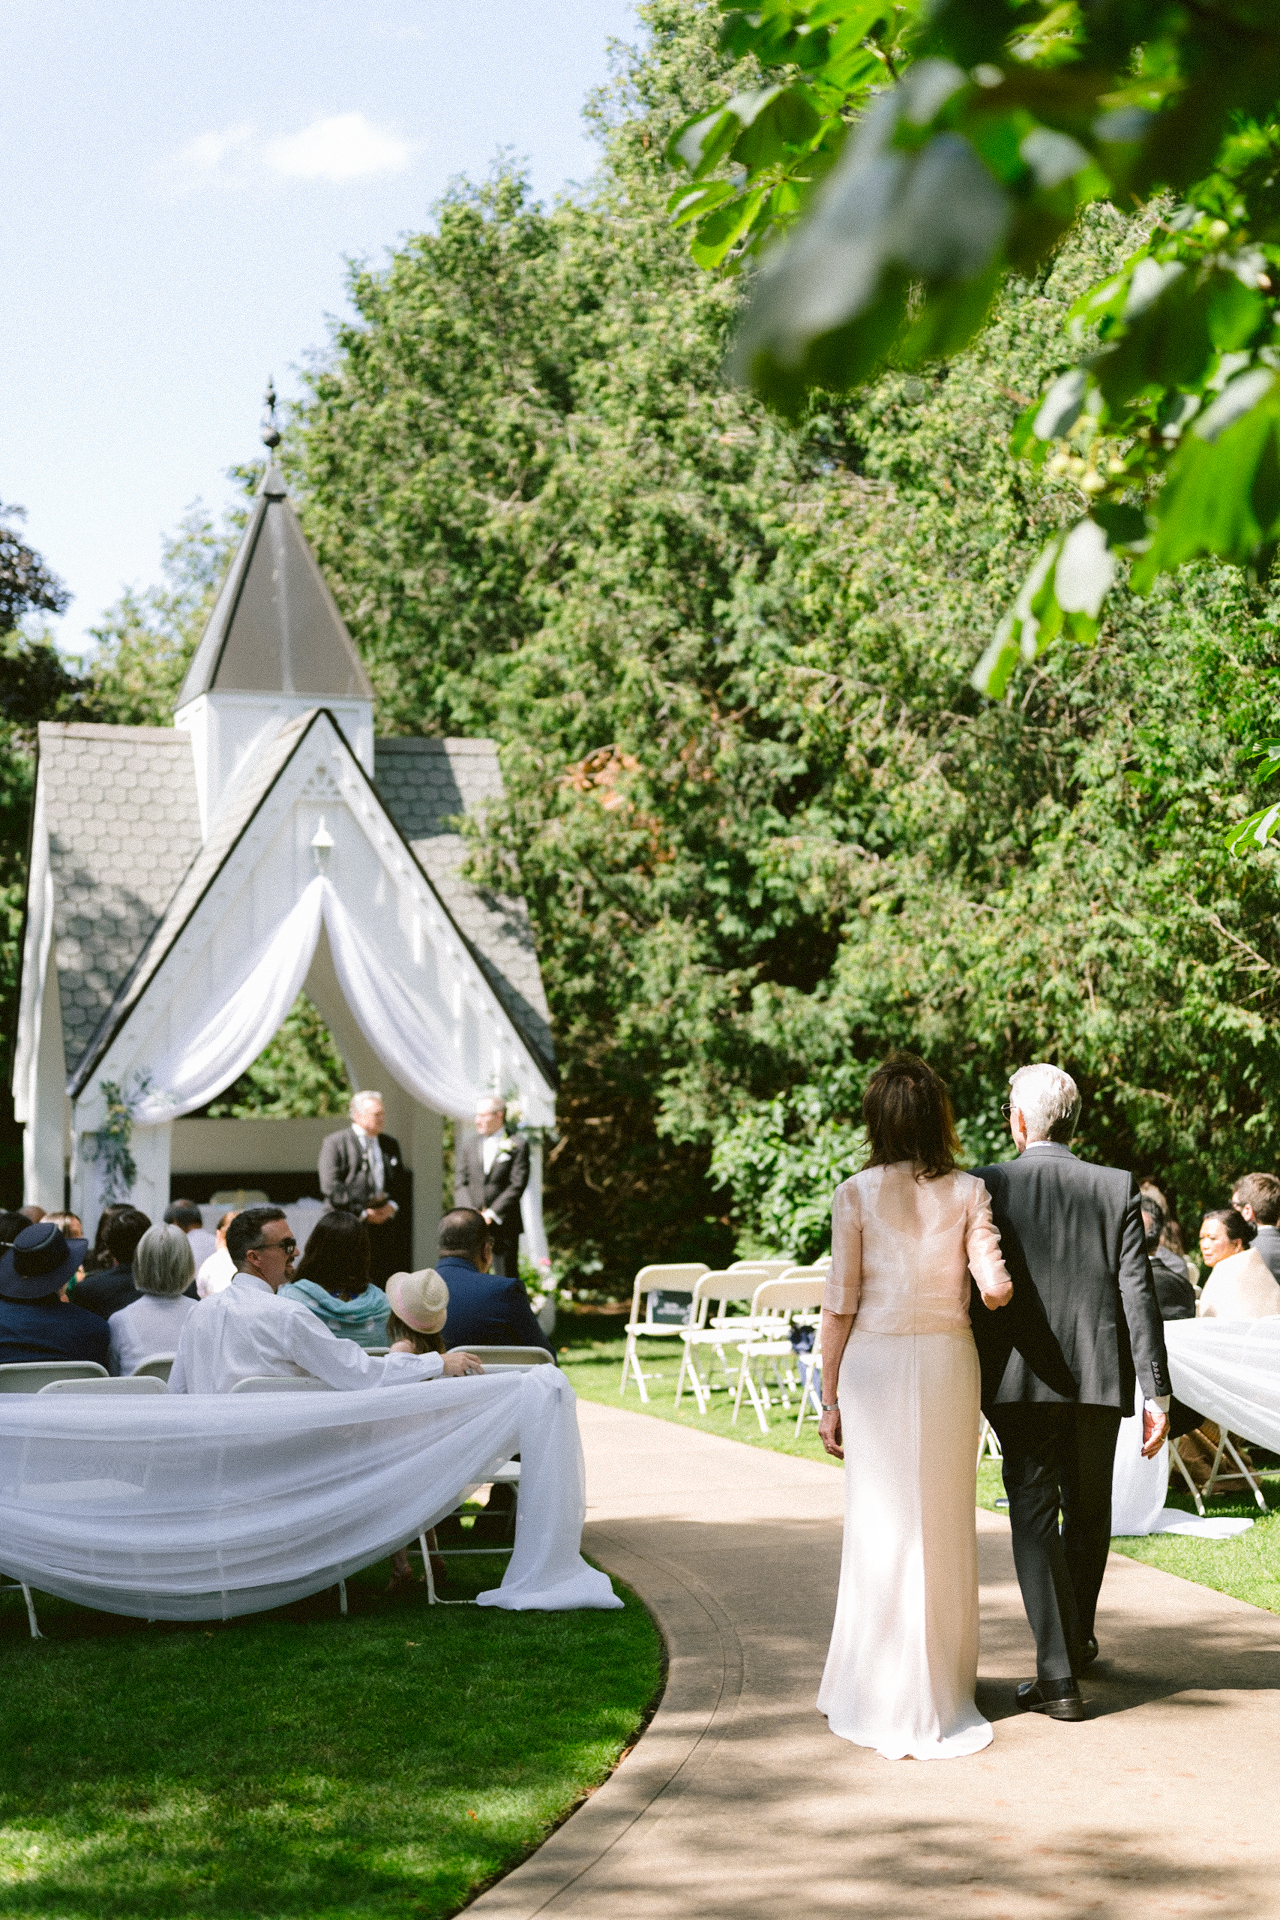 A couple walking down the aisle at an outdoor wedding ceremony.